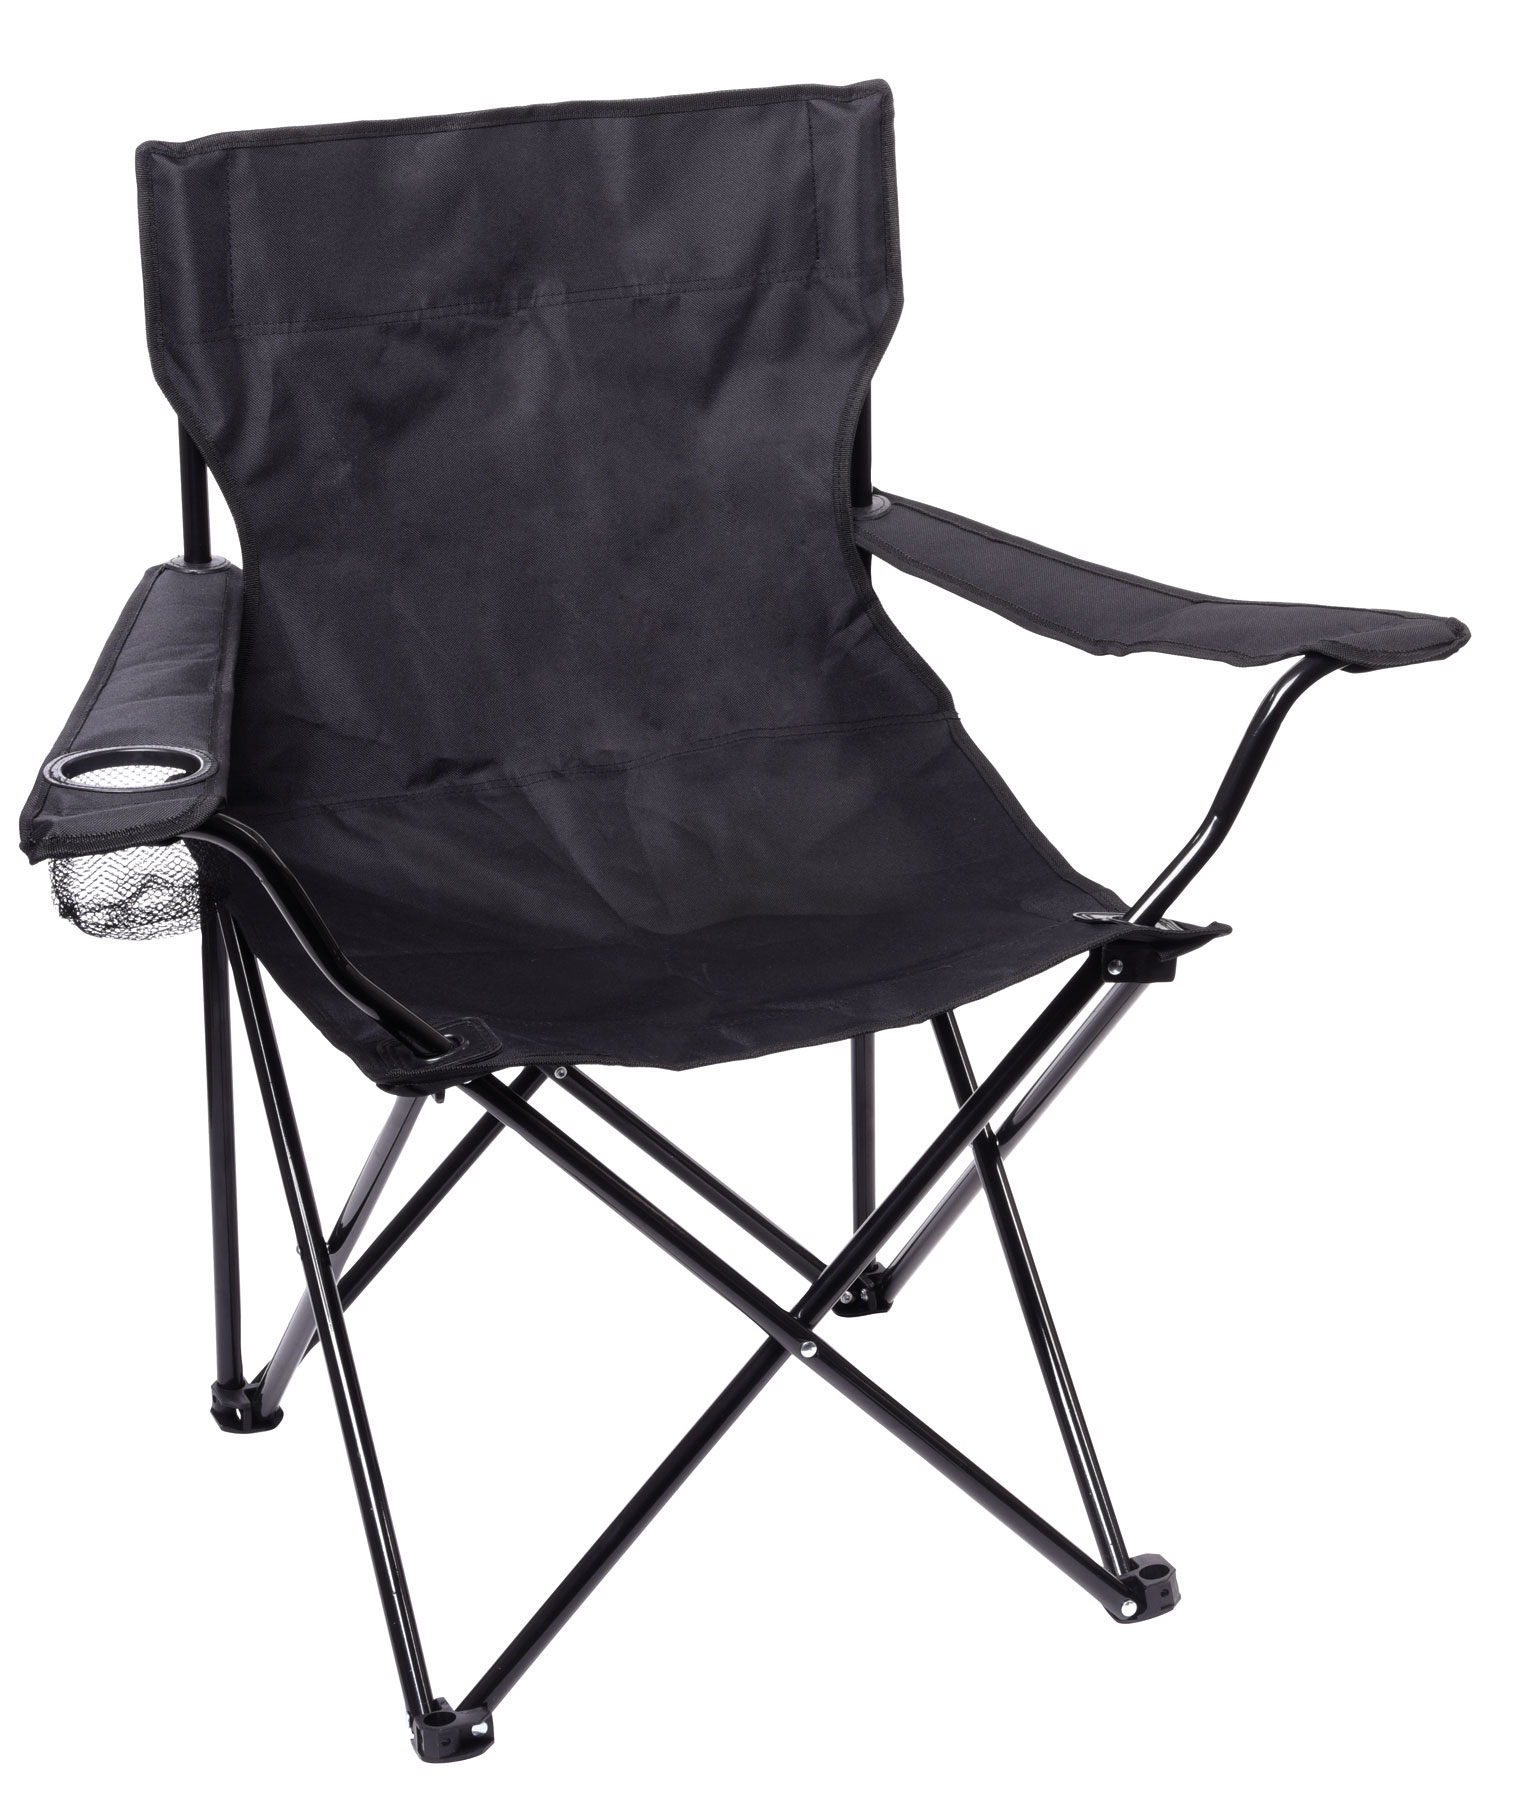 Beach and camping chair SUNNY DAY - black